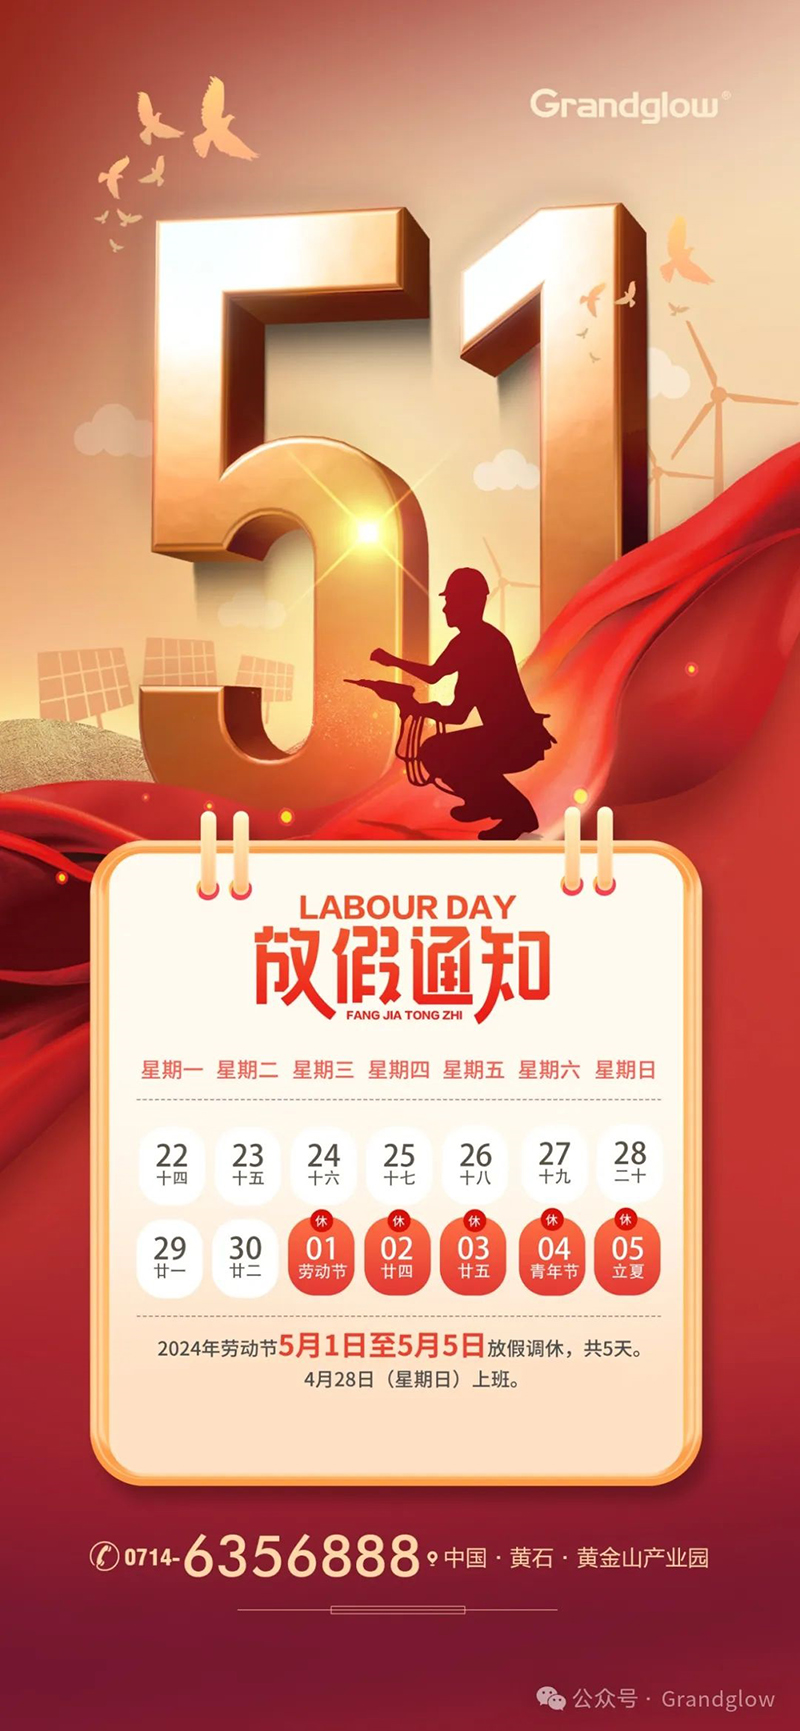 Notice of Labor Day holiday on May Day